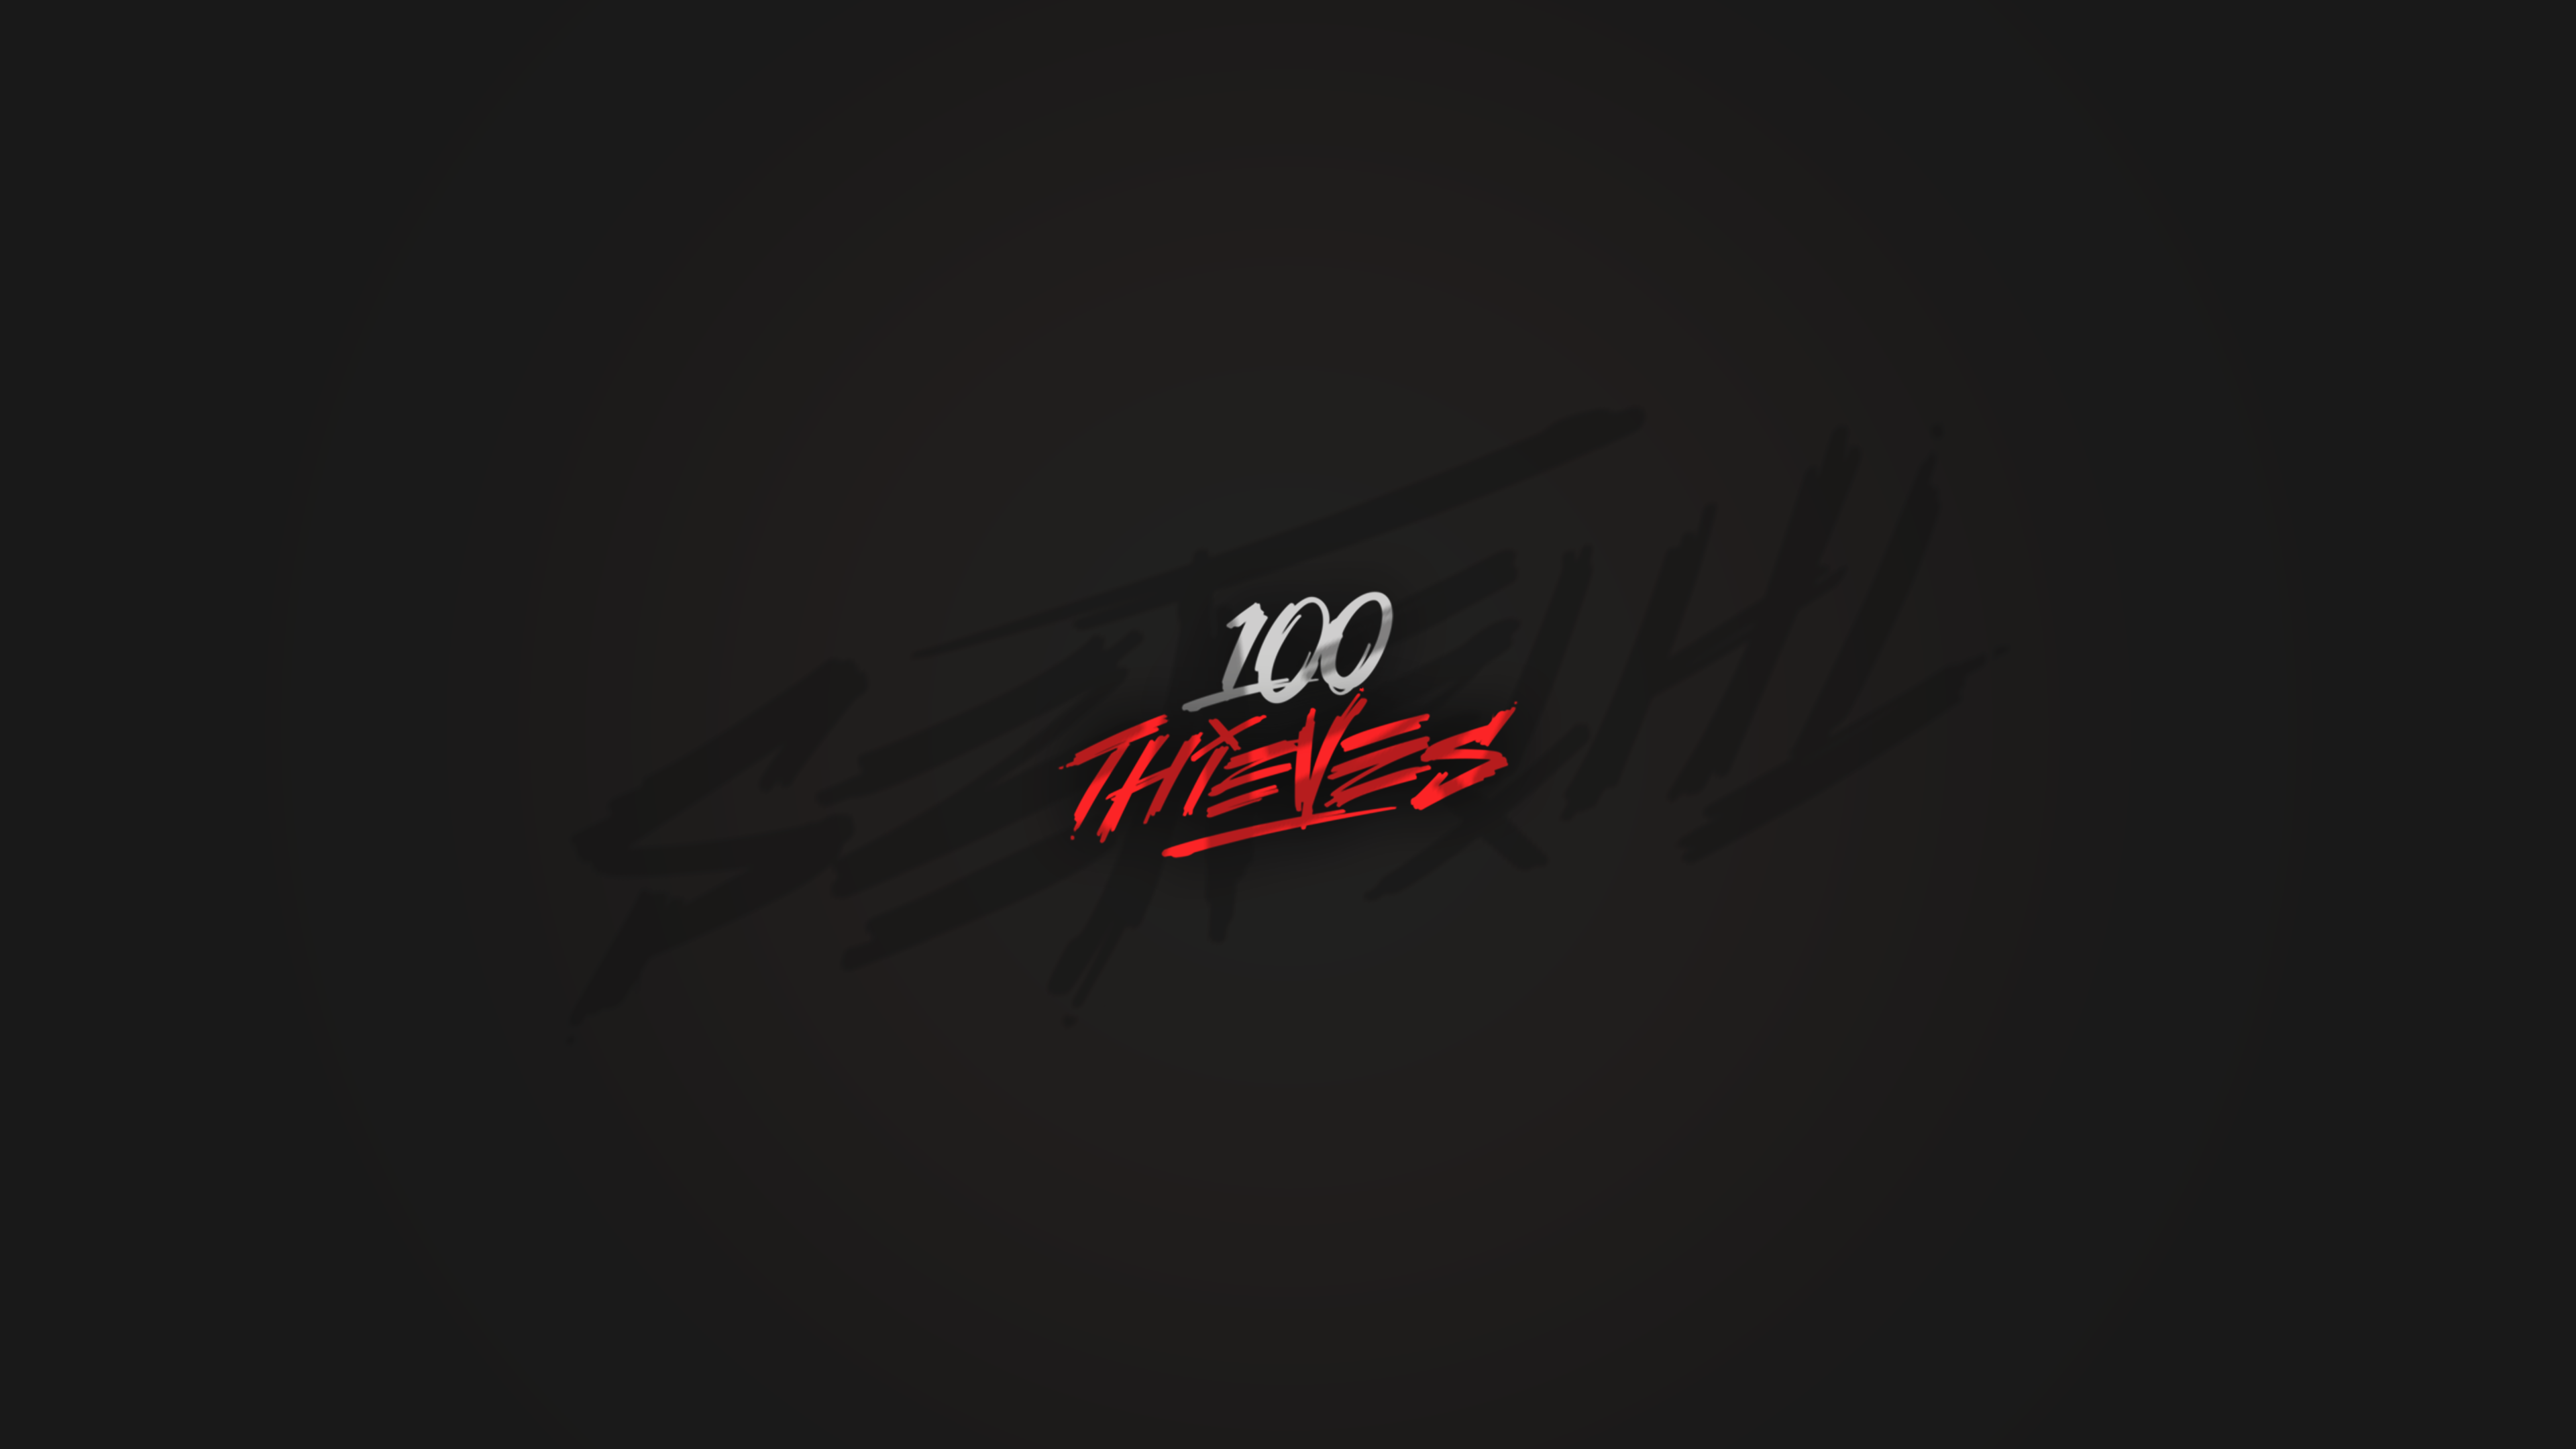 100 Thieves ~ Anime Wallpapers on Behance